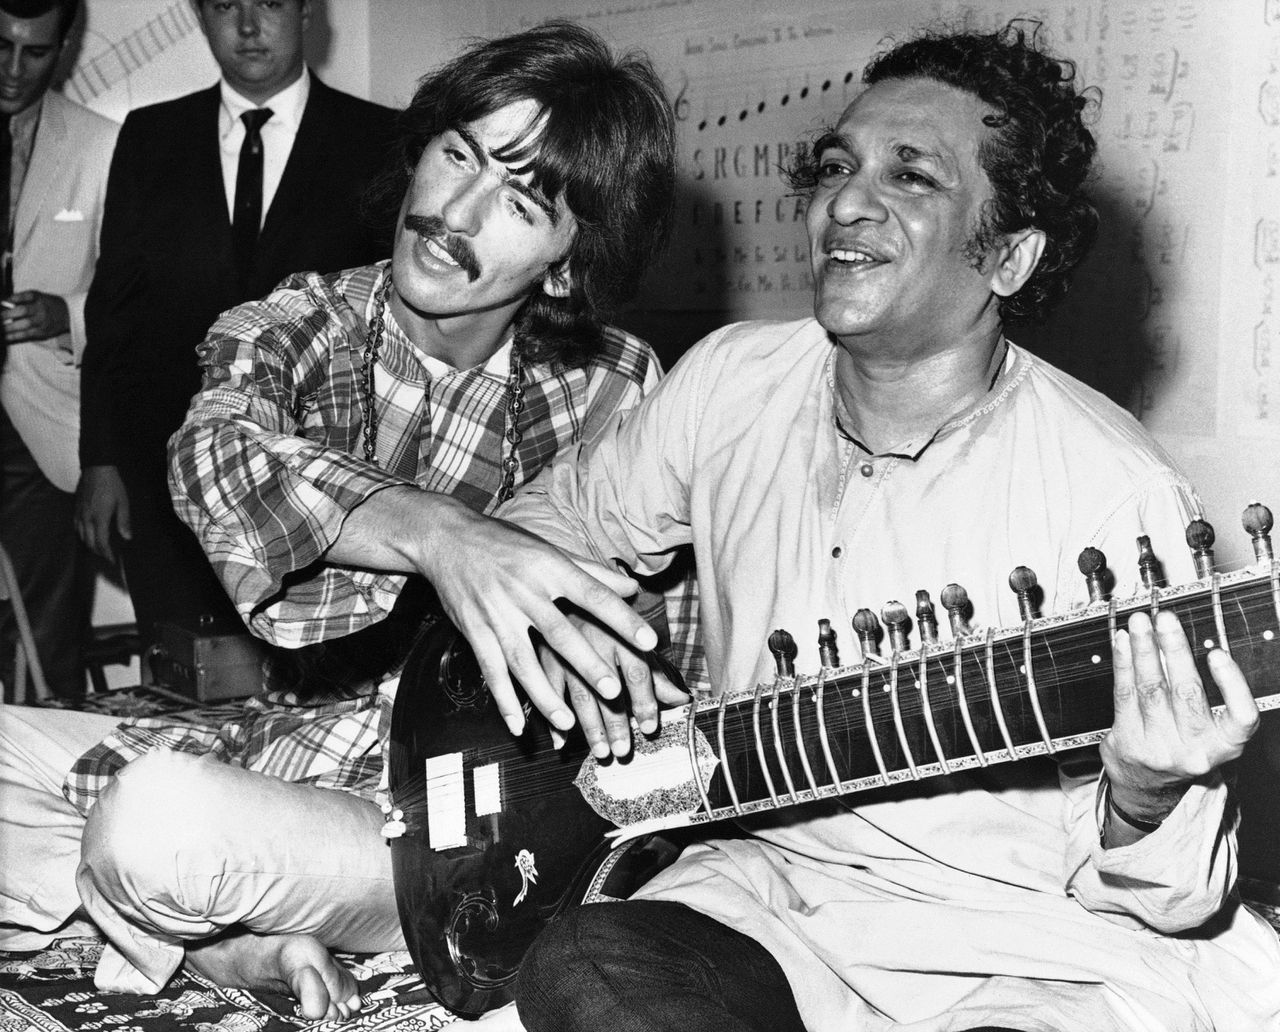 FILE - In this Aug. 3, 1967 file photo, George Harrison, of the Beatles, left, sits cross-legged with his musical mentor, Ravi Shankar of India, in Los Angeles, as Harrison explains to newsmen that Shankar is teaching him to play the sitar. Shankar, the sitar virtuoso who became a hippie musical icon of the 1960s after hobnobbing with the Beatles and who introduced traditional Indian ragas to Western audiences over an eight-decade career, died Tuesday, Dec. 11, 2012. He was 92. (AP File Photo)